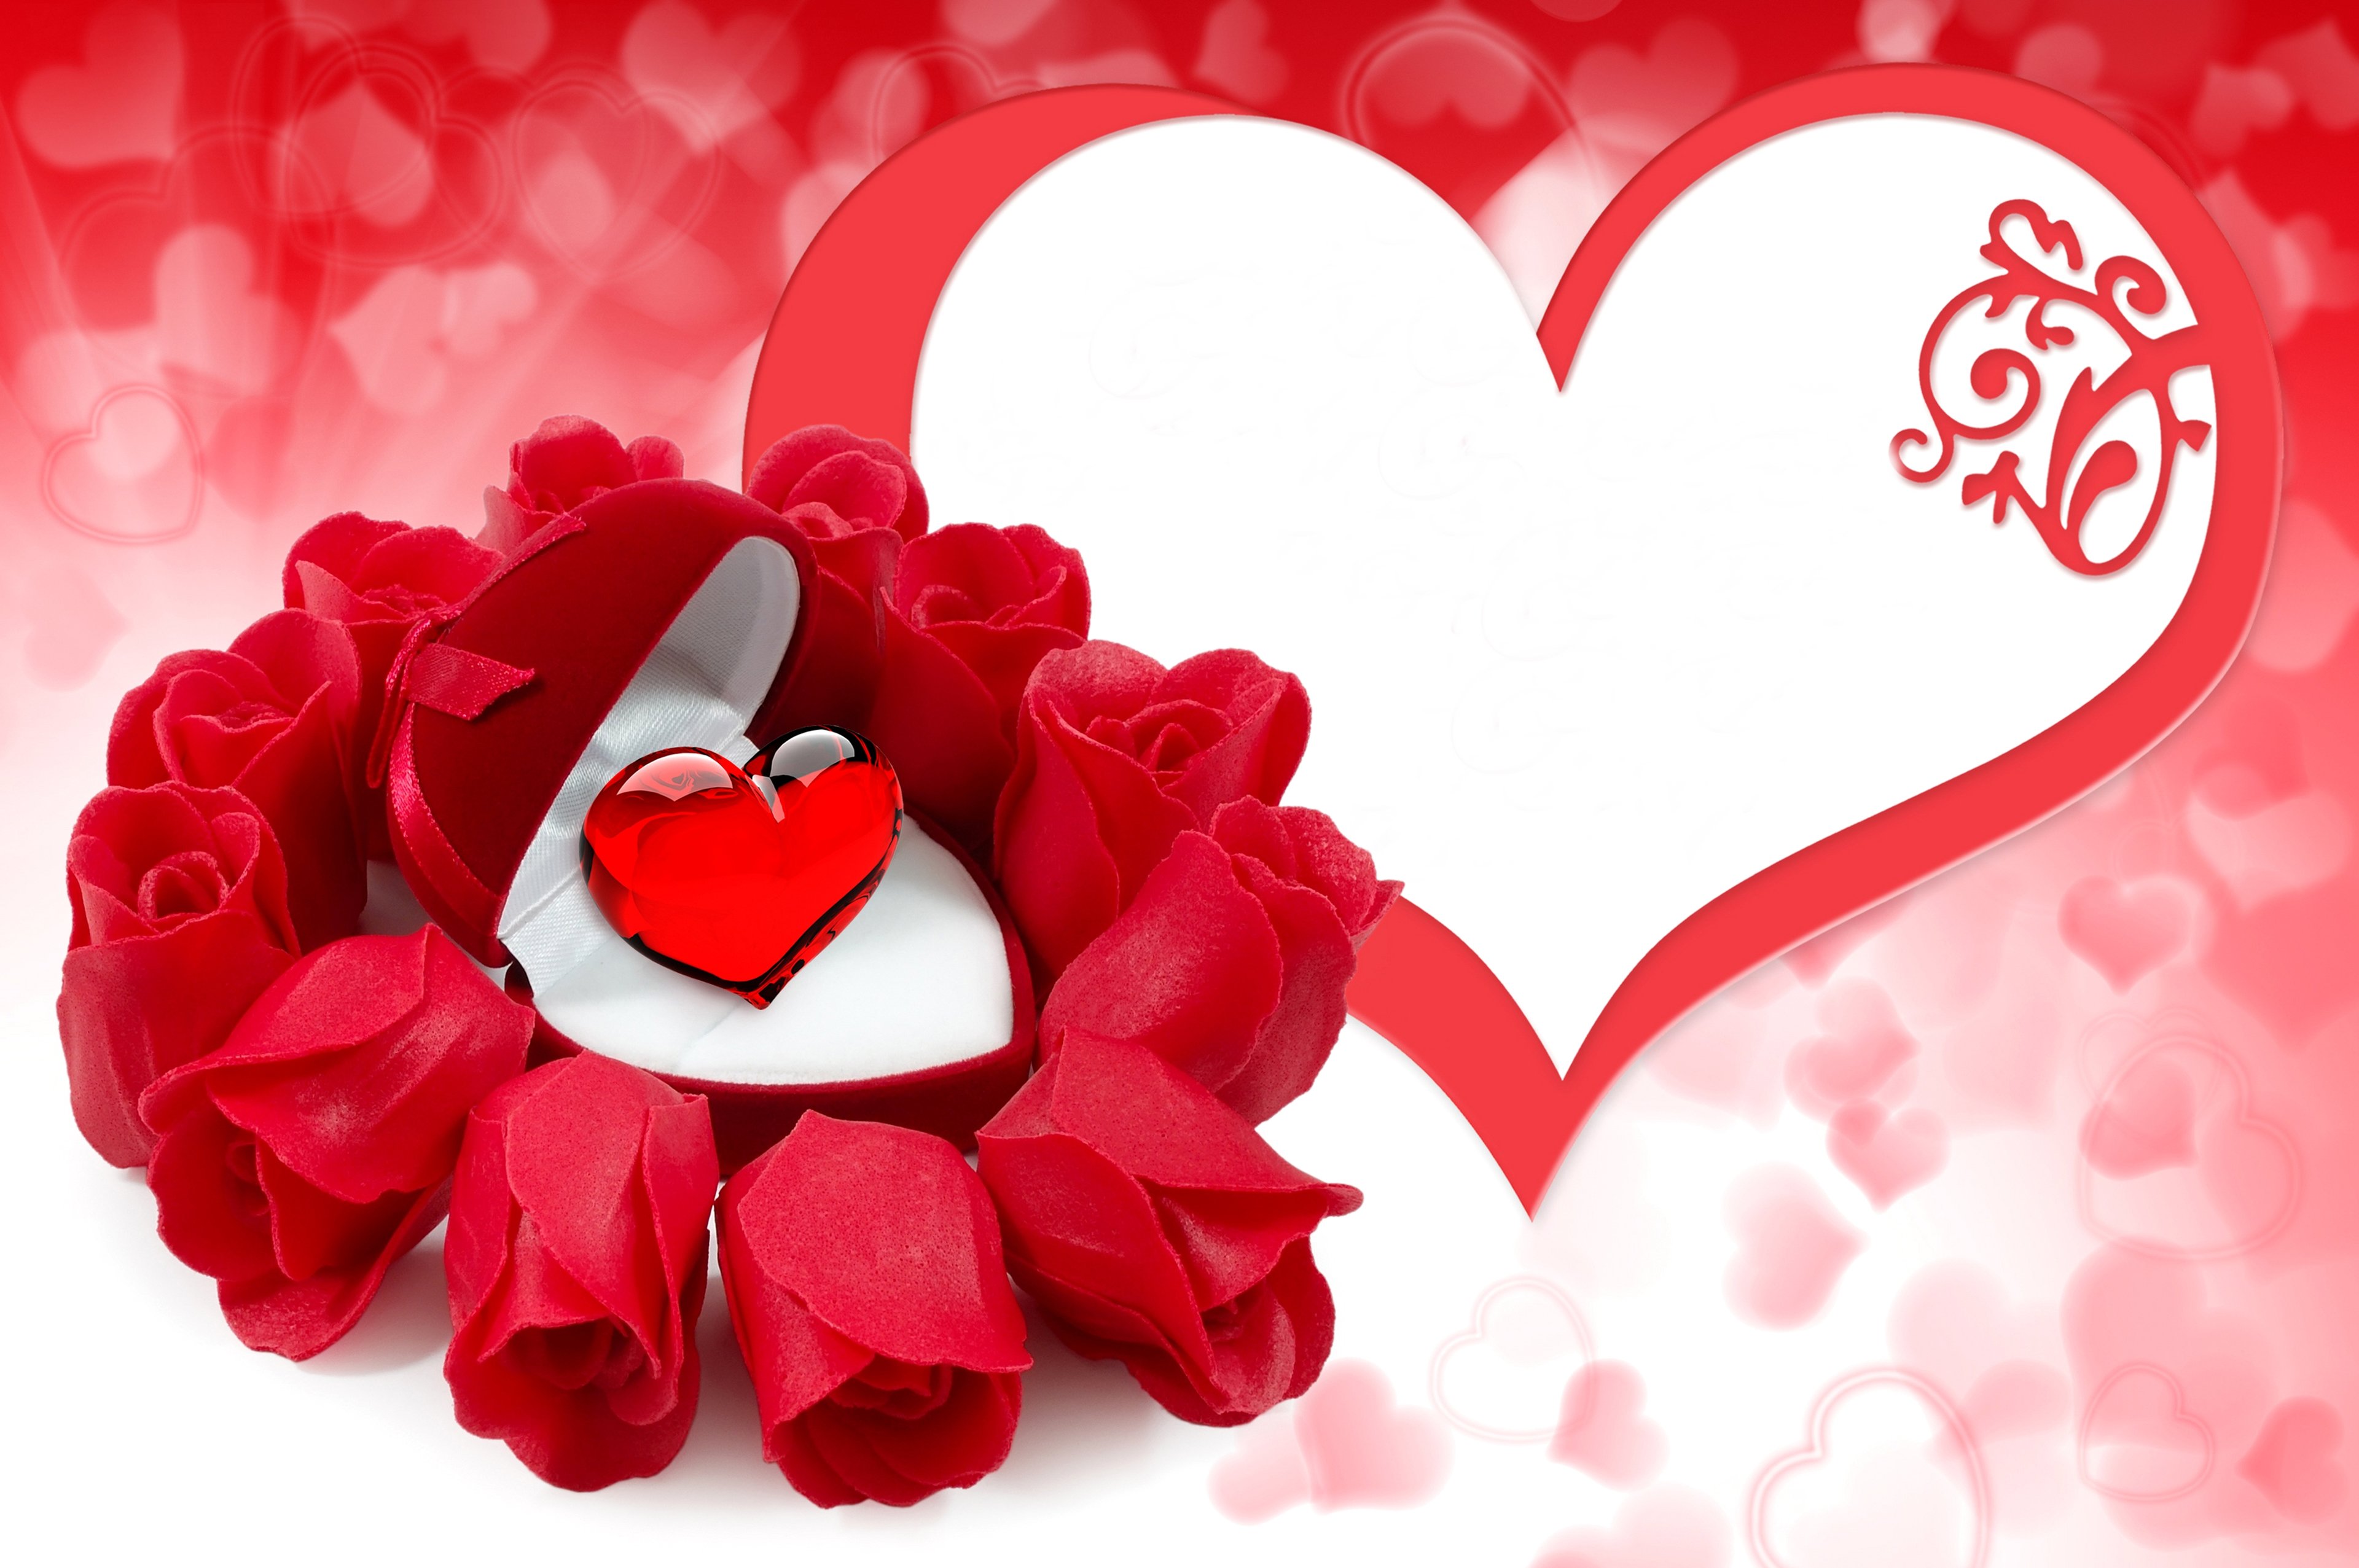 bouquet,  , Hearts,  , Couple,  , Flowers,  , For,  , Gift,  , Life,  , Love,  , Red,  , Romance,  , Rose Wallpaper